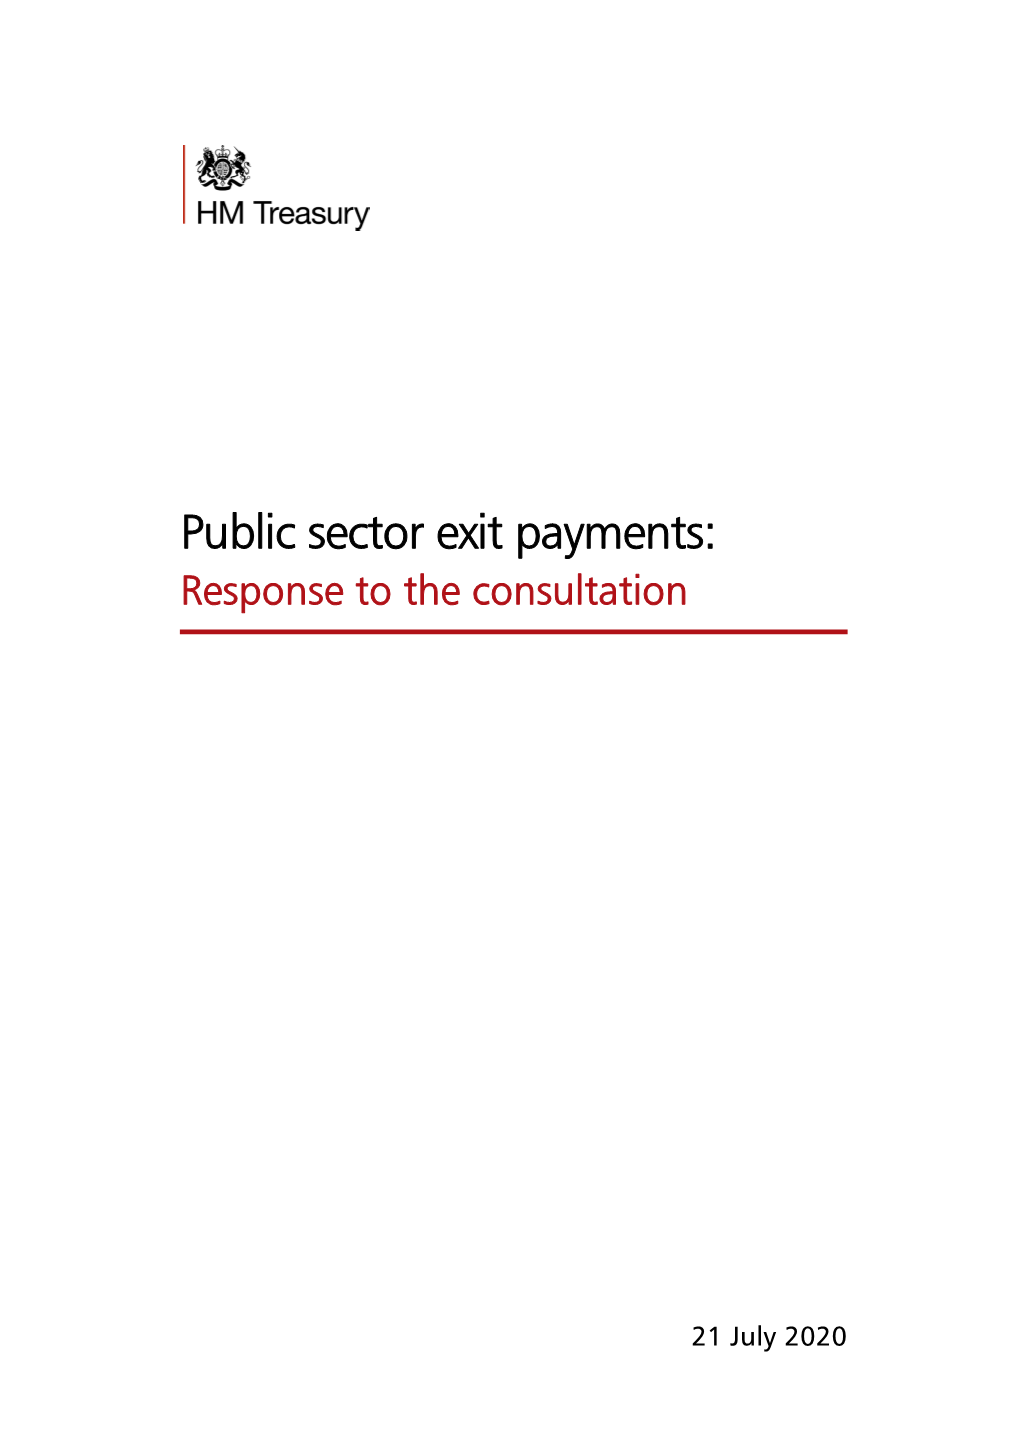 Public Sector Exit Payments: Response to Consultation